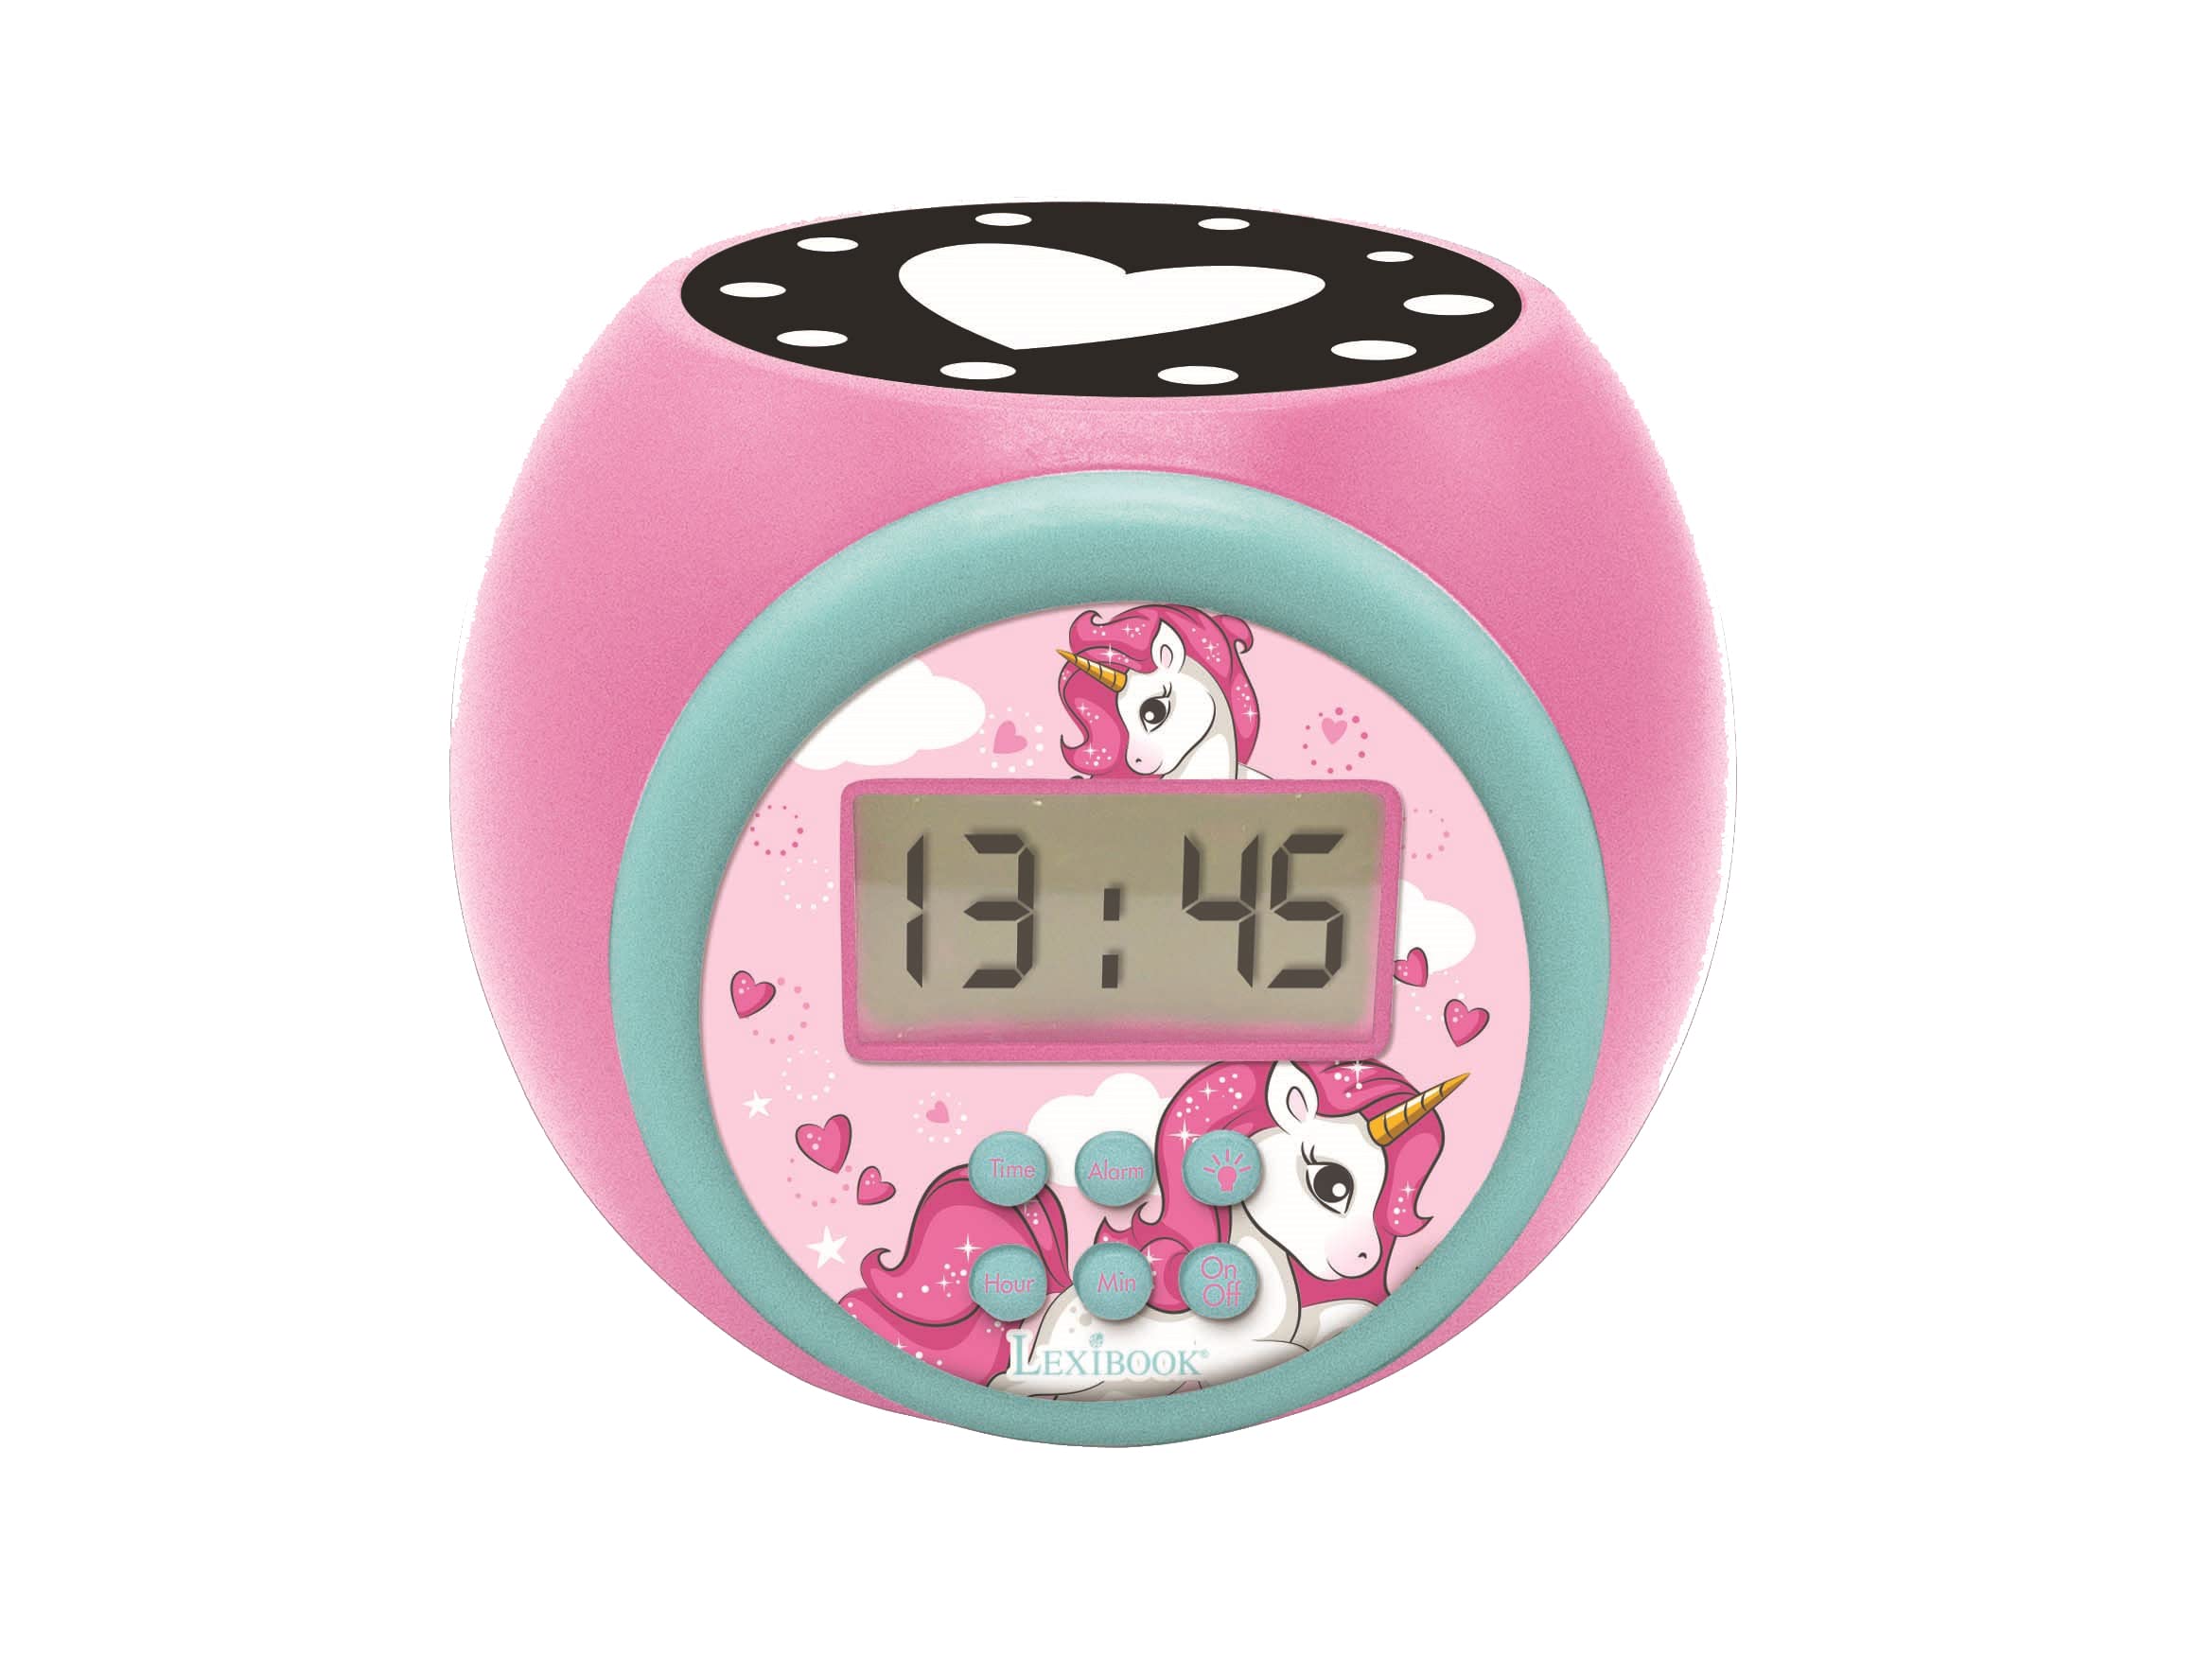 LEXIBOOK Projector clock Unicorn with Snooze Alarm Function, Night Light with Timer, LcD Screen, Battery Operated, Pink, RL977UN